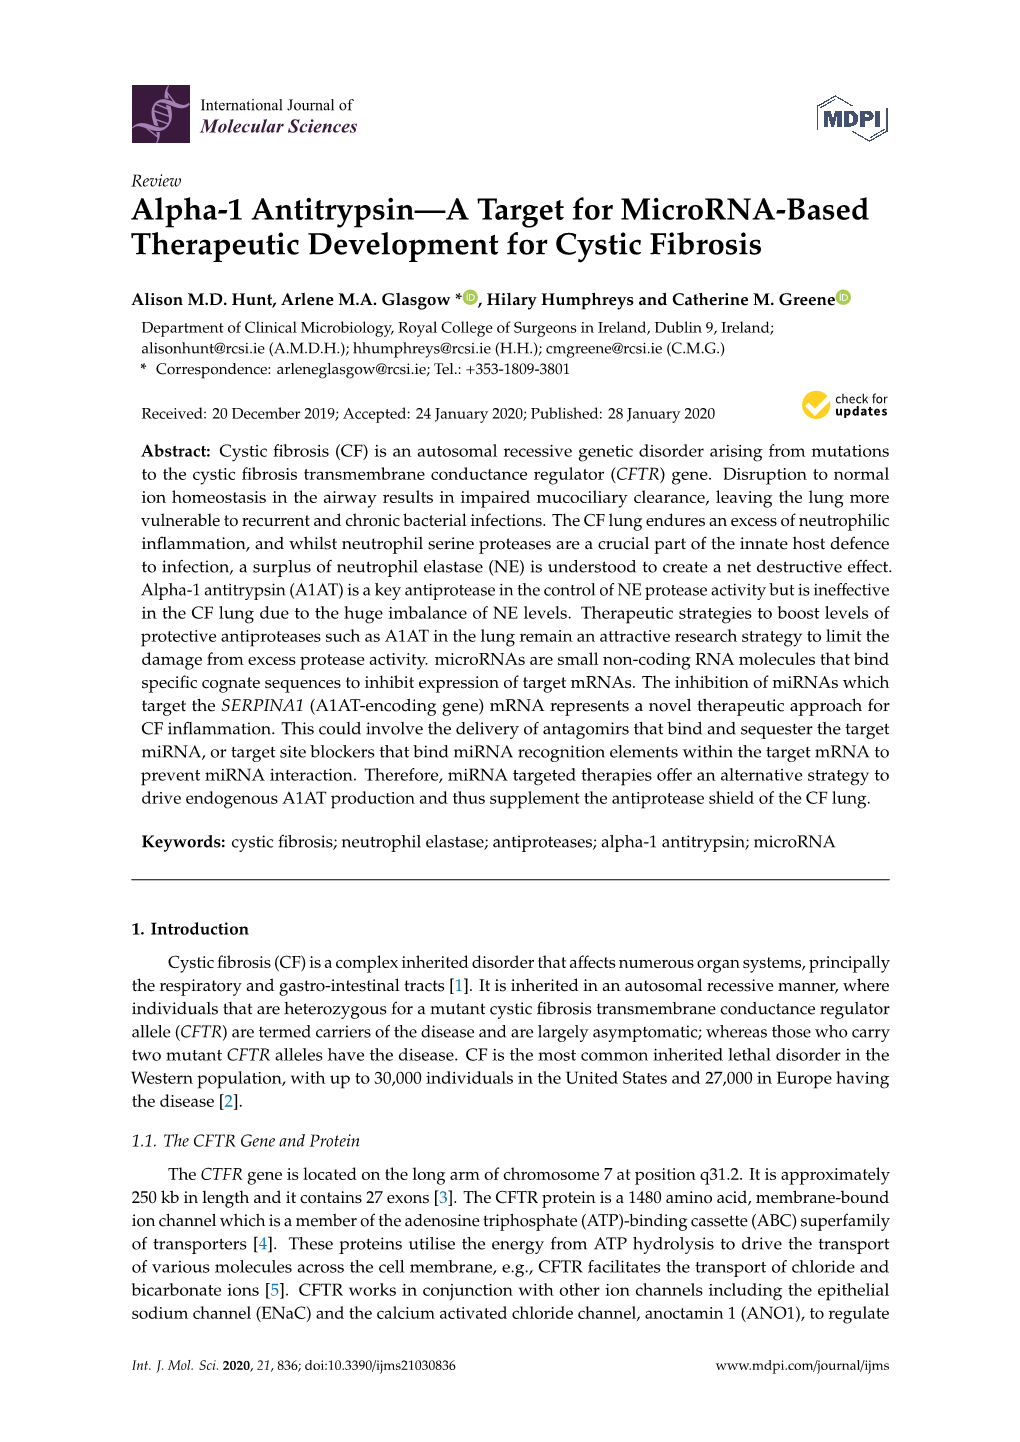 Alpha-1 Antitrypsin—A Target for Microrna-Based Therapeutic Development for Cystic Fibrosis